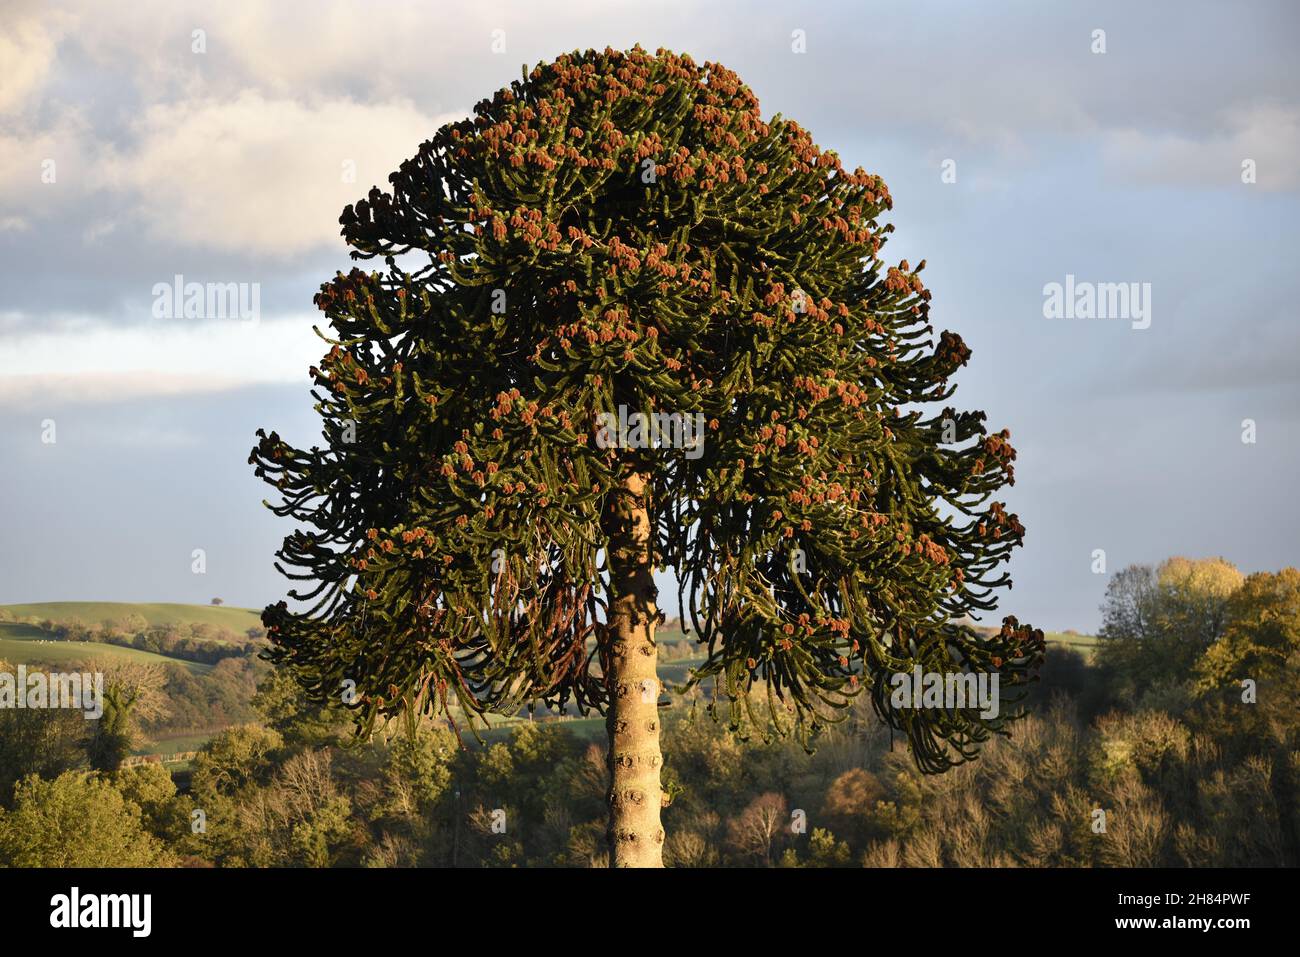 Full-Frame Image of the Top of a Monkey Puzzle Tree (Araucaria araucaria) in Full Bloom in the Autumn Sun in Mid-Wales, UK Stock Photo